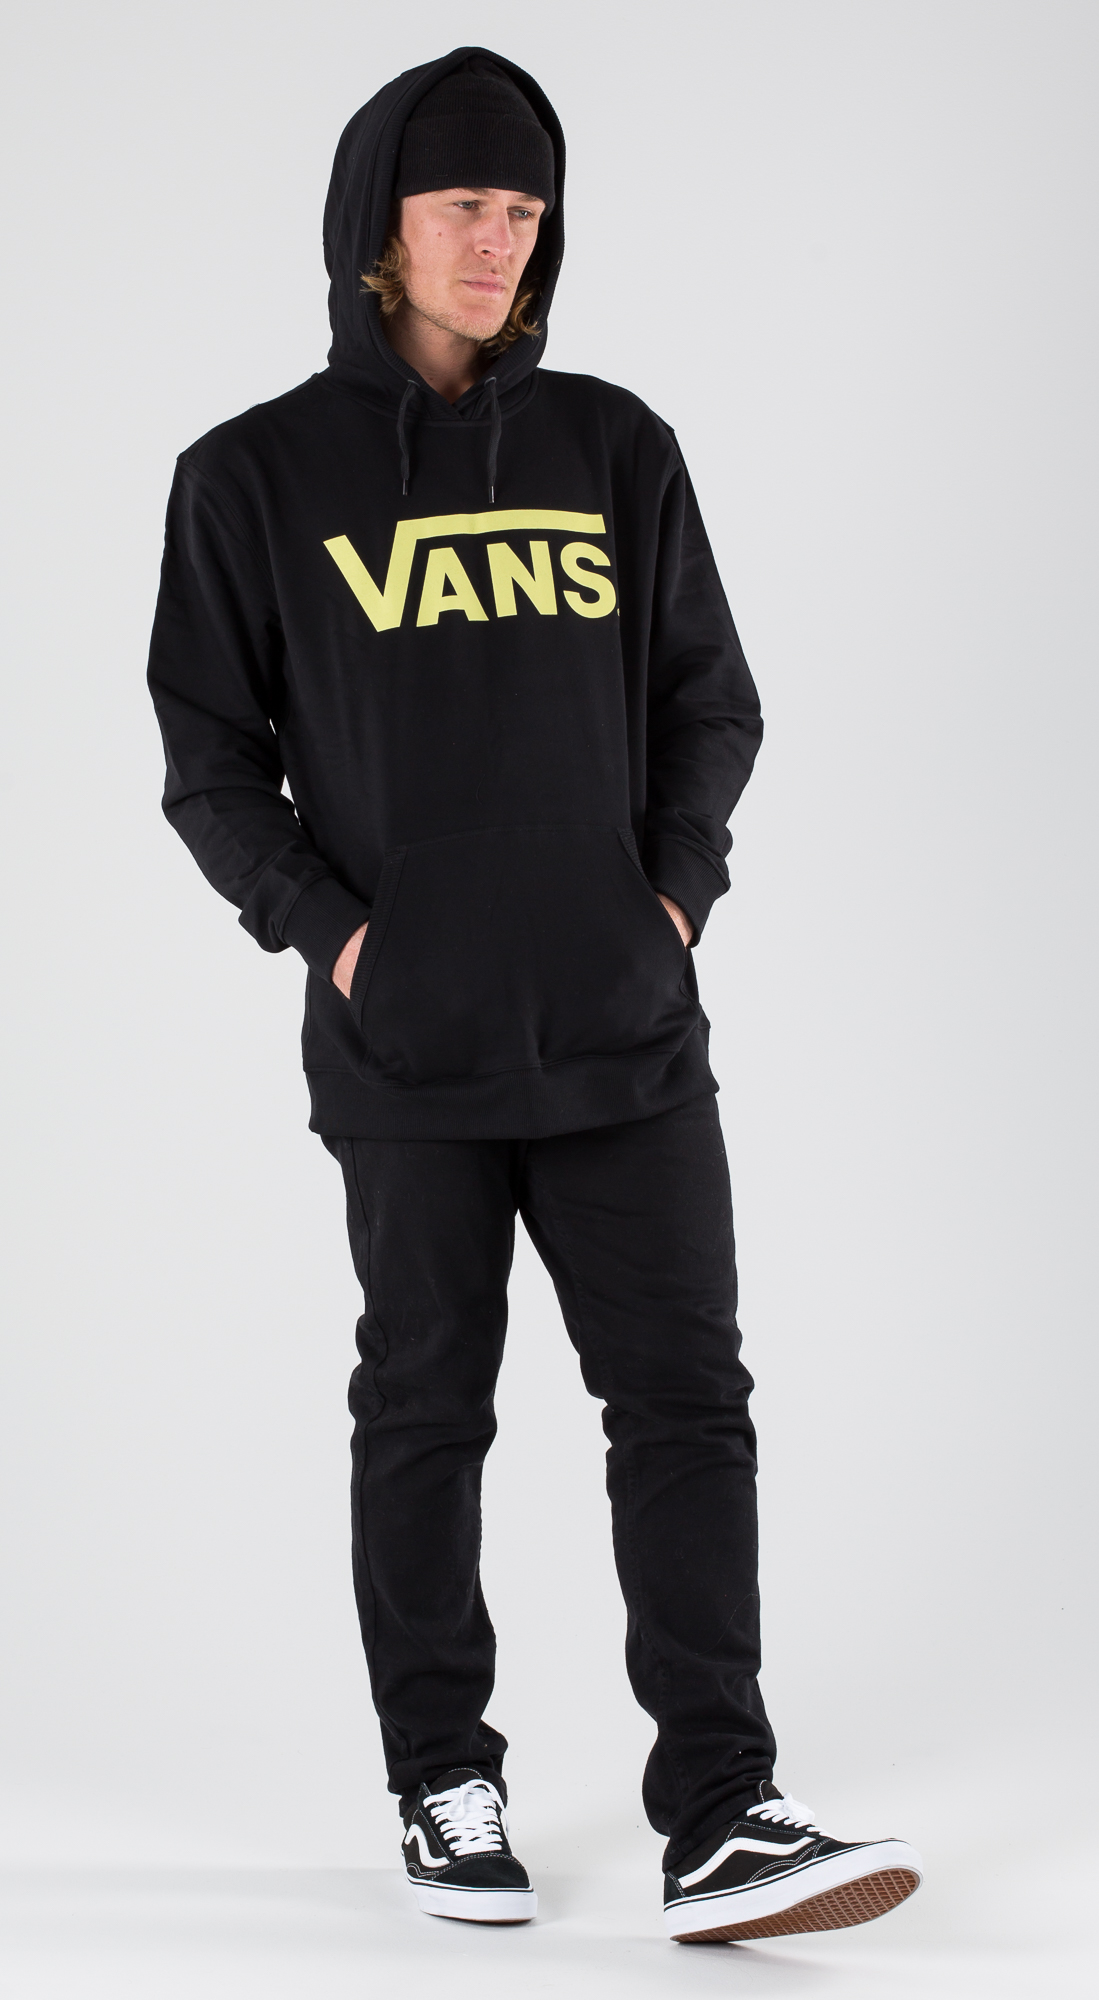 vans classic outfit